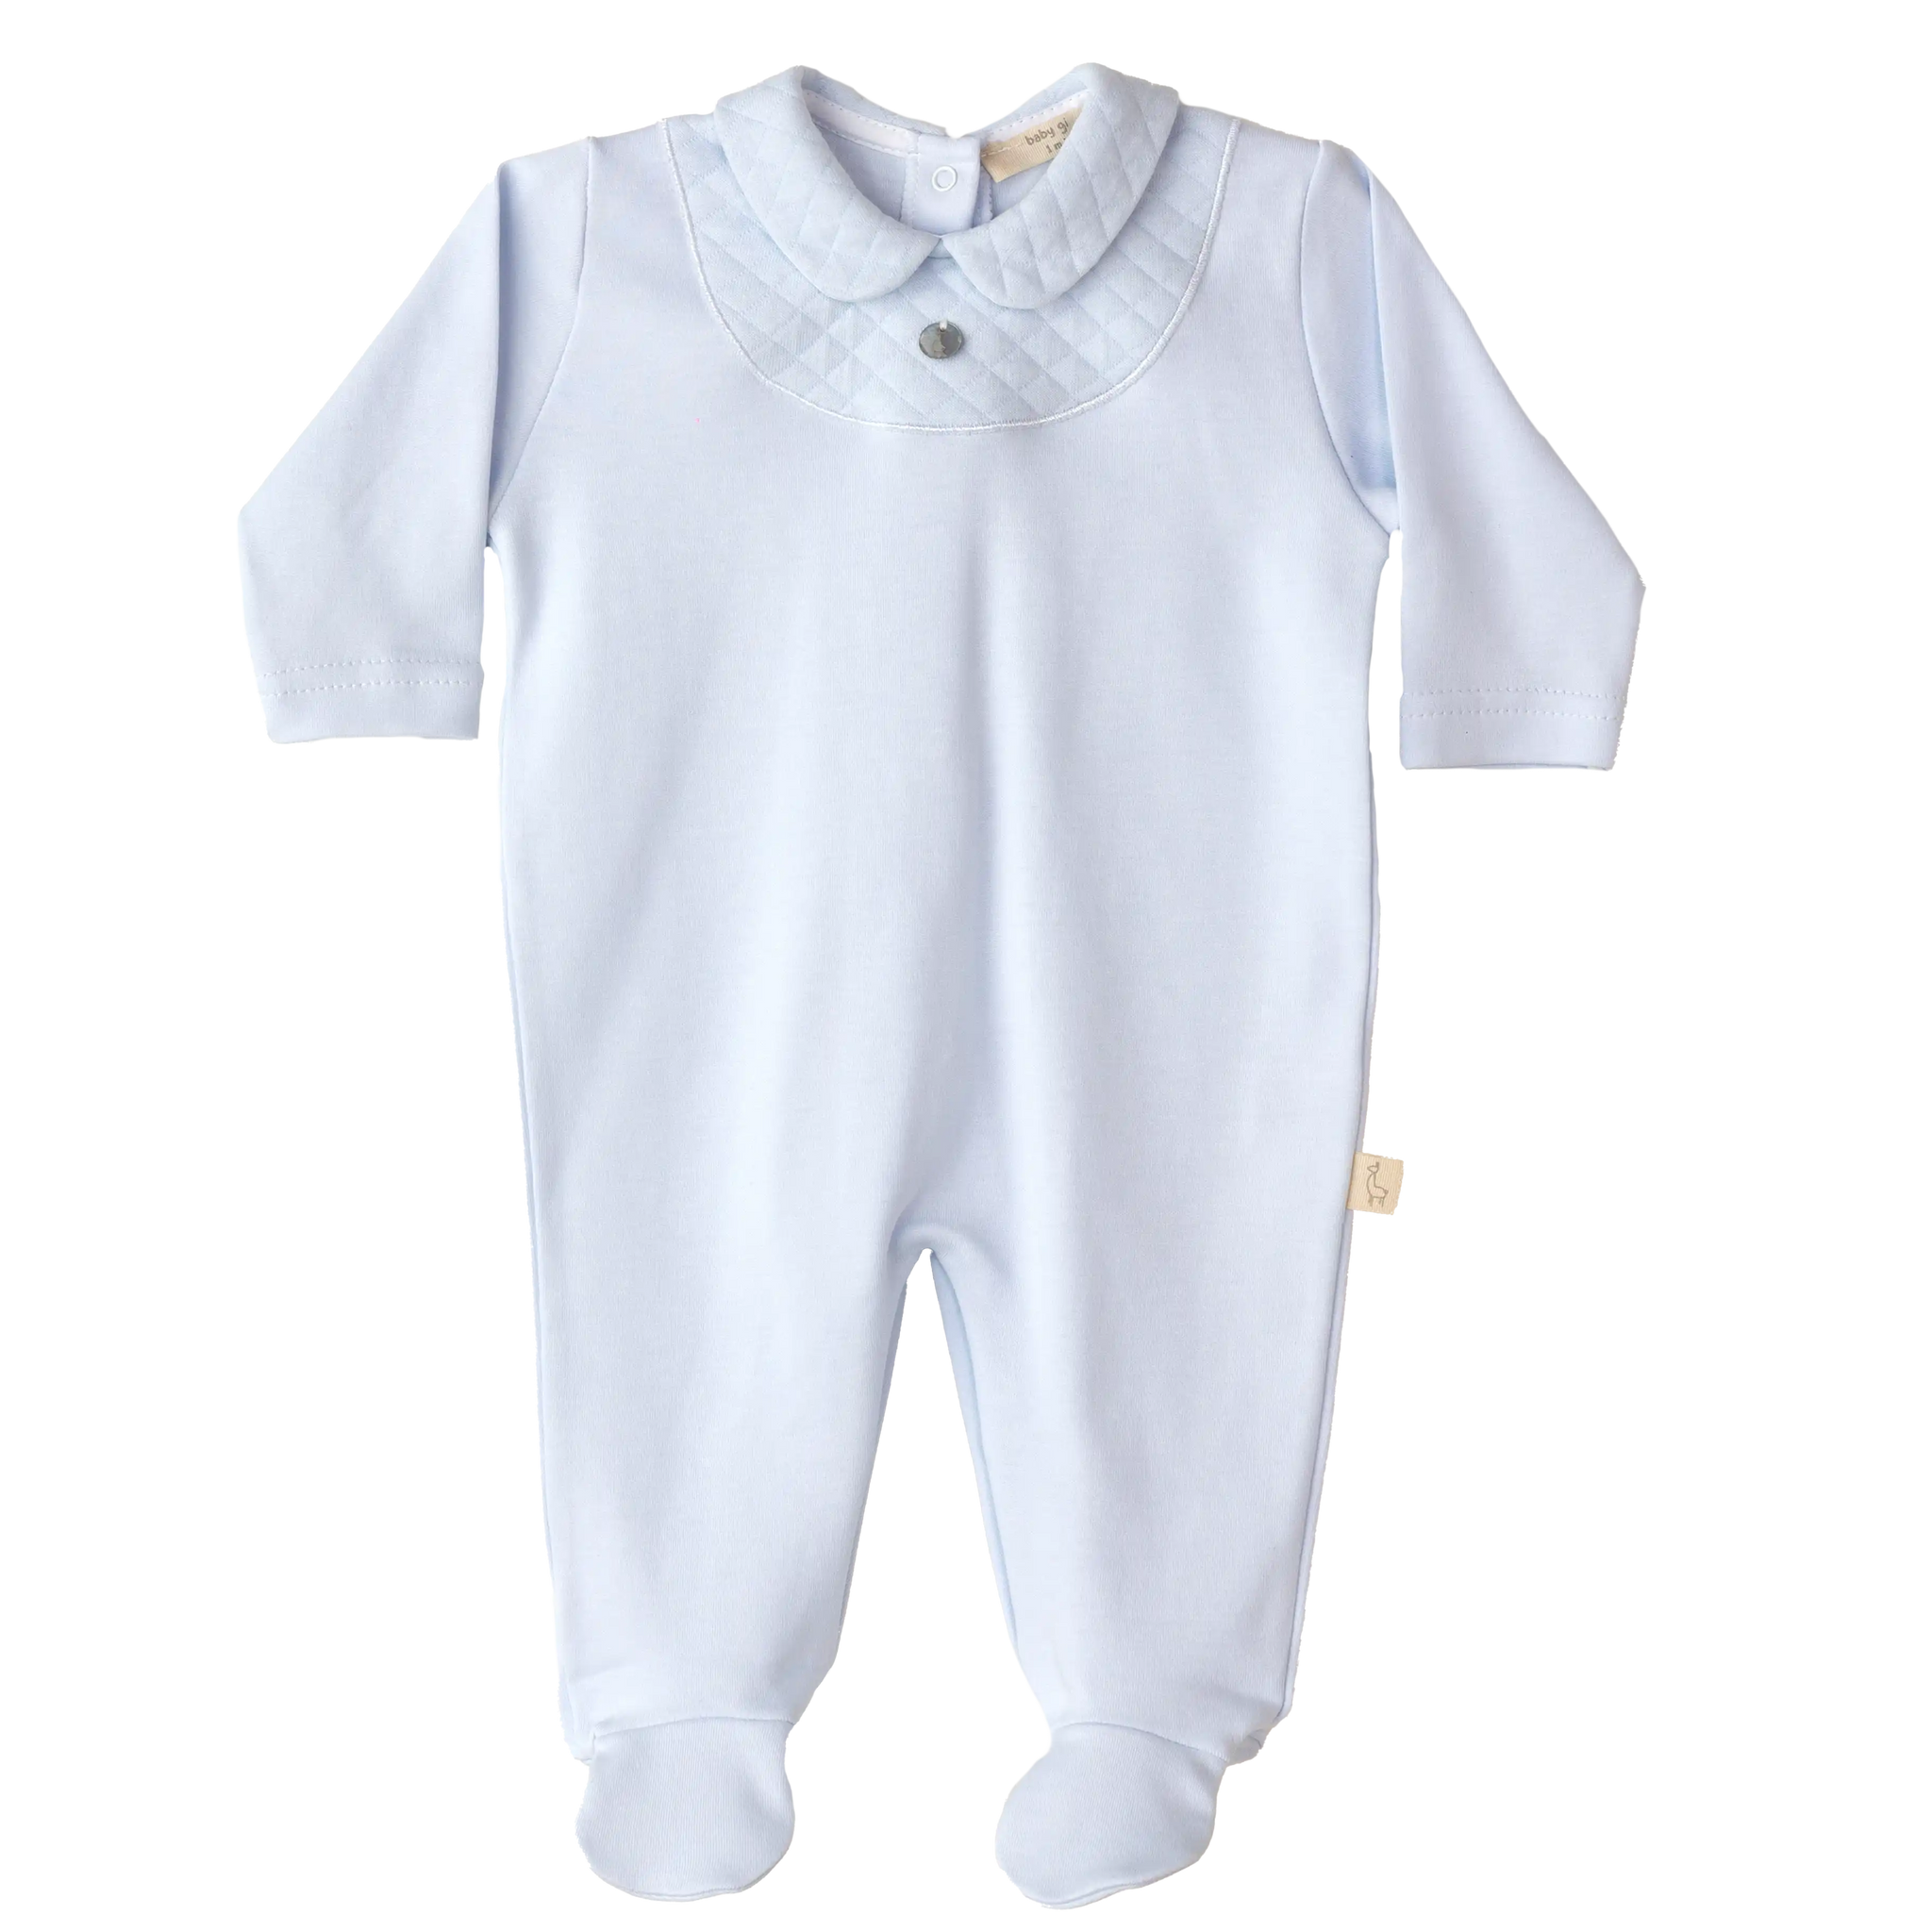 Baby Gi Quilted Peter Pan Collar Sleepsuit Blue